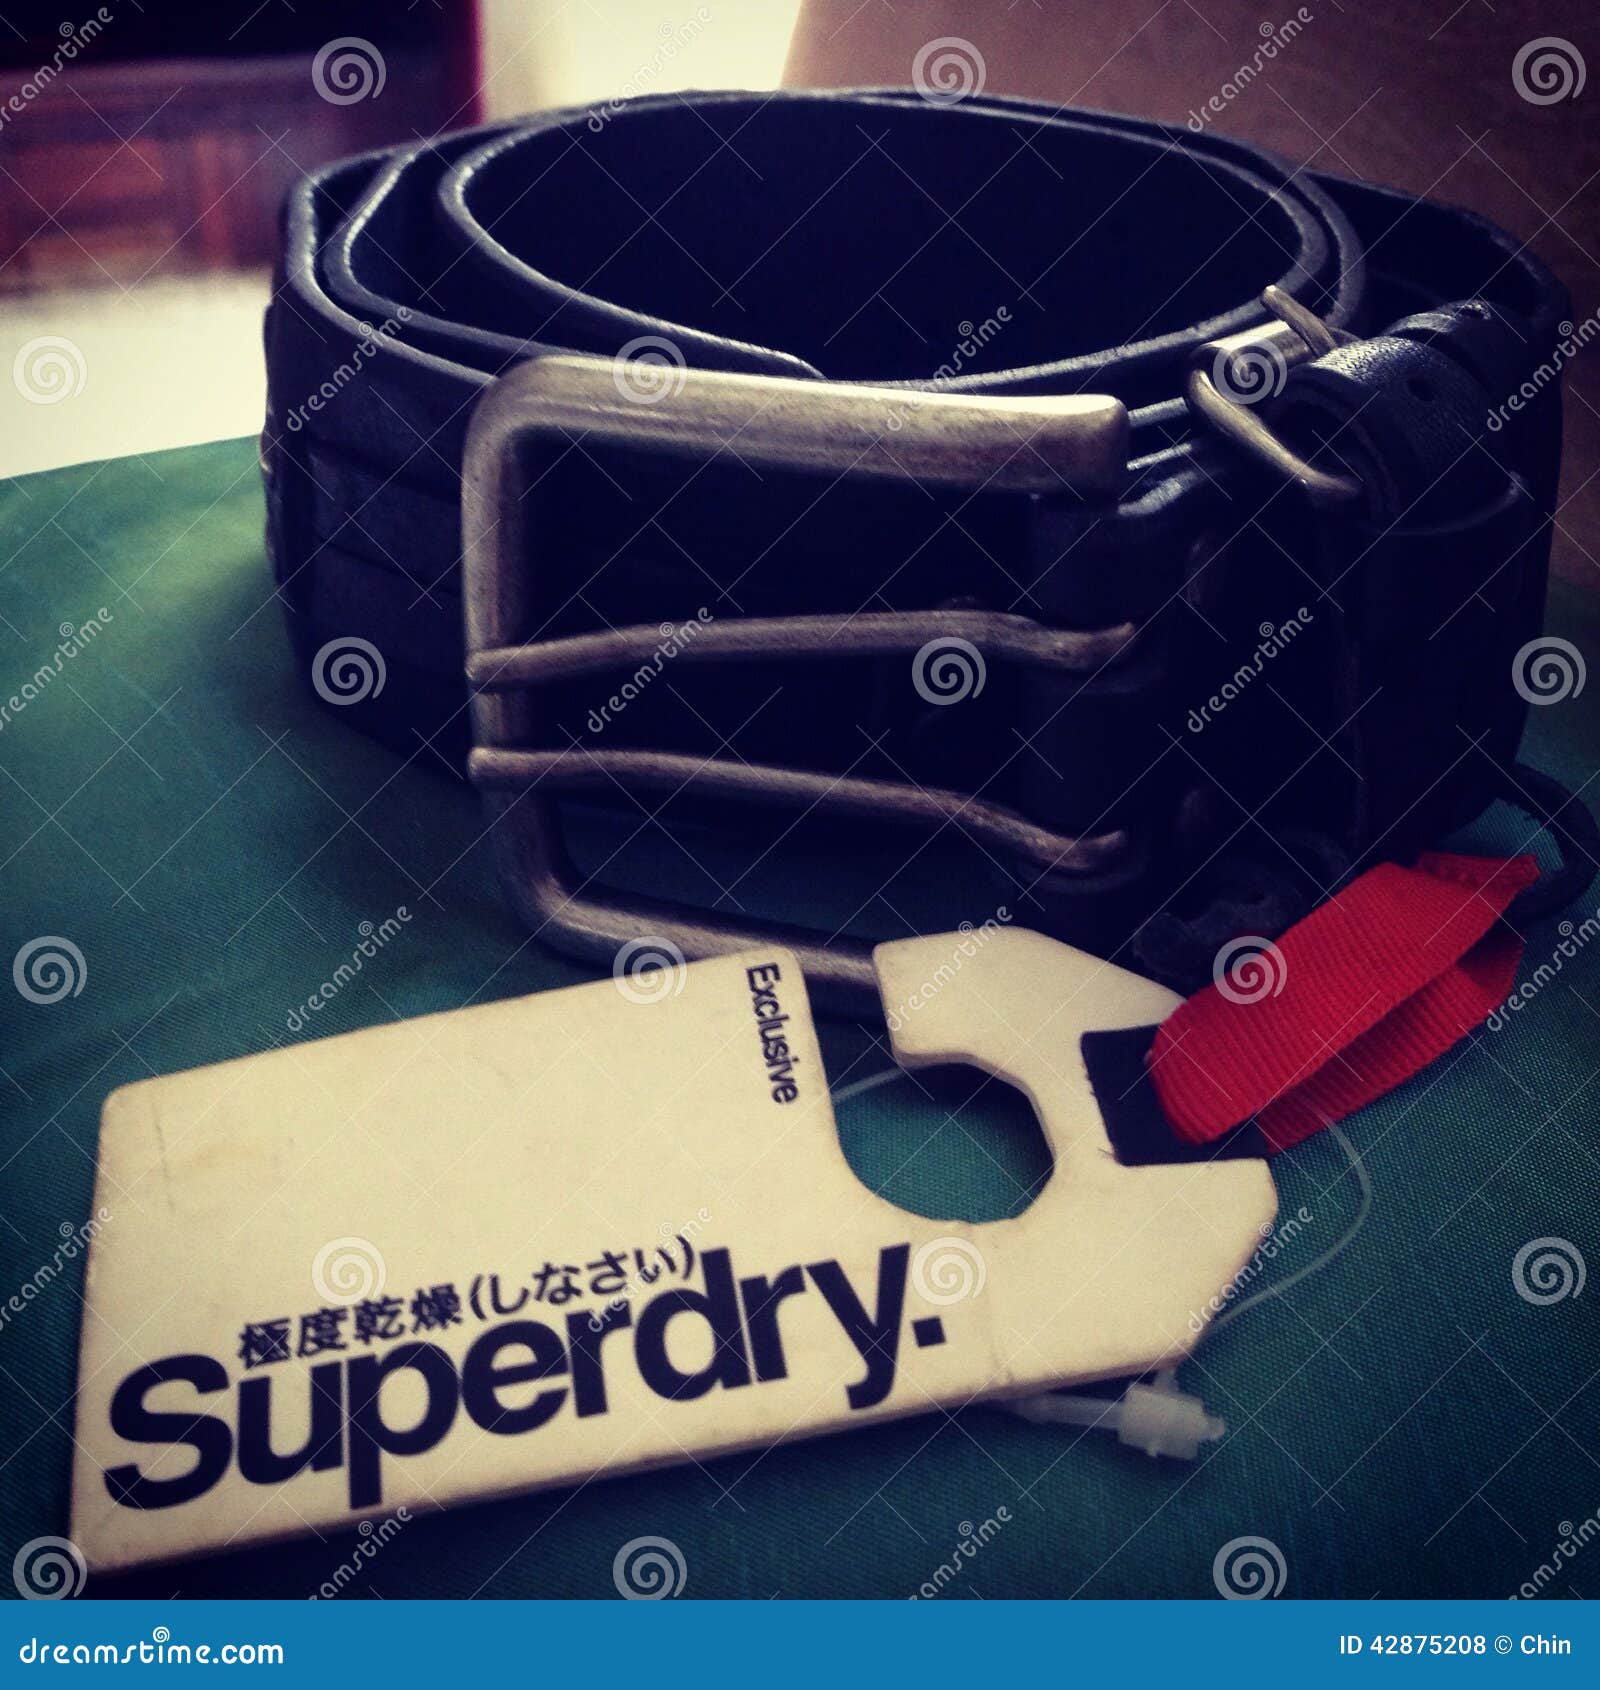 50+ Superdry Photos Stock Photos, Pictures & Royalty-Free Images